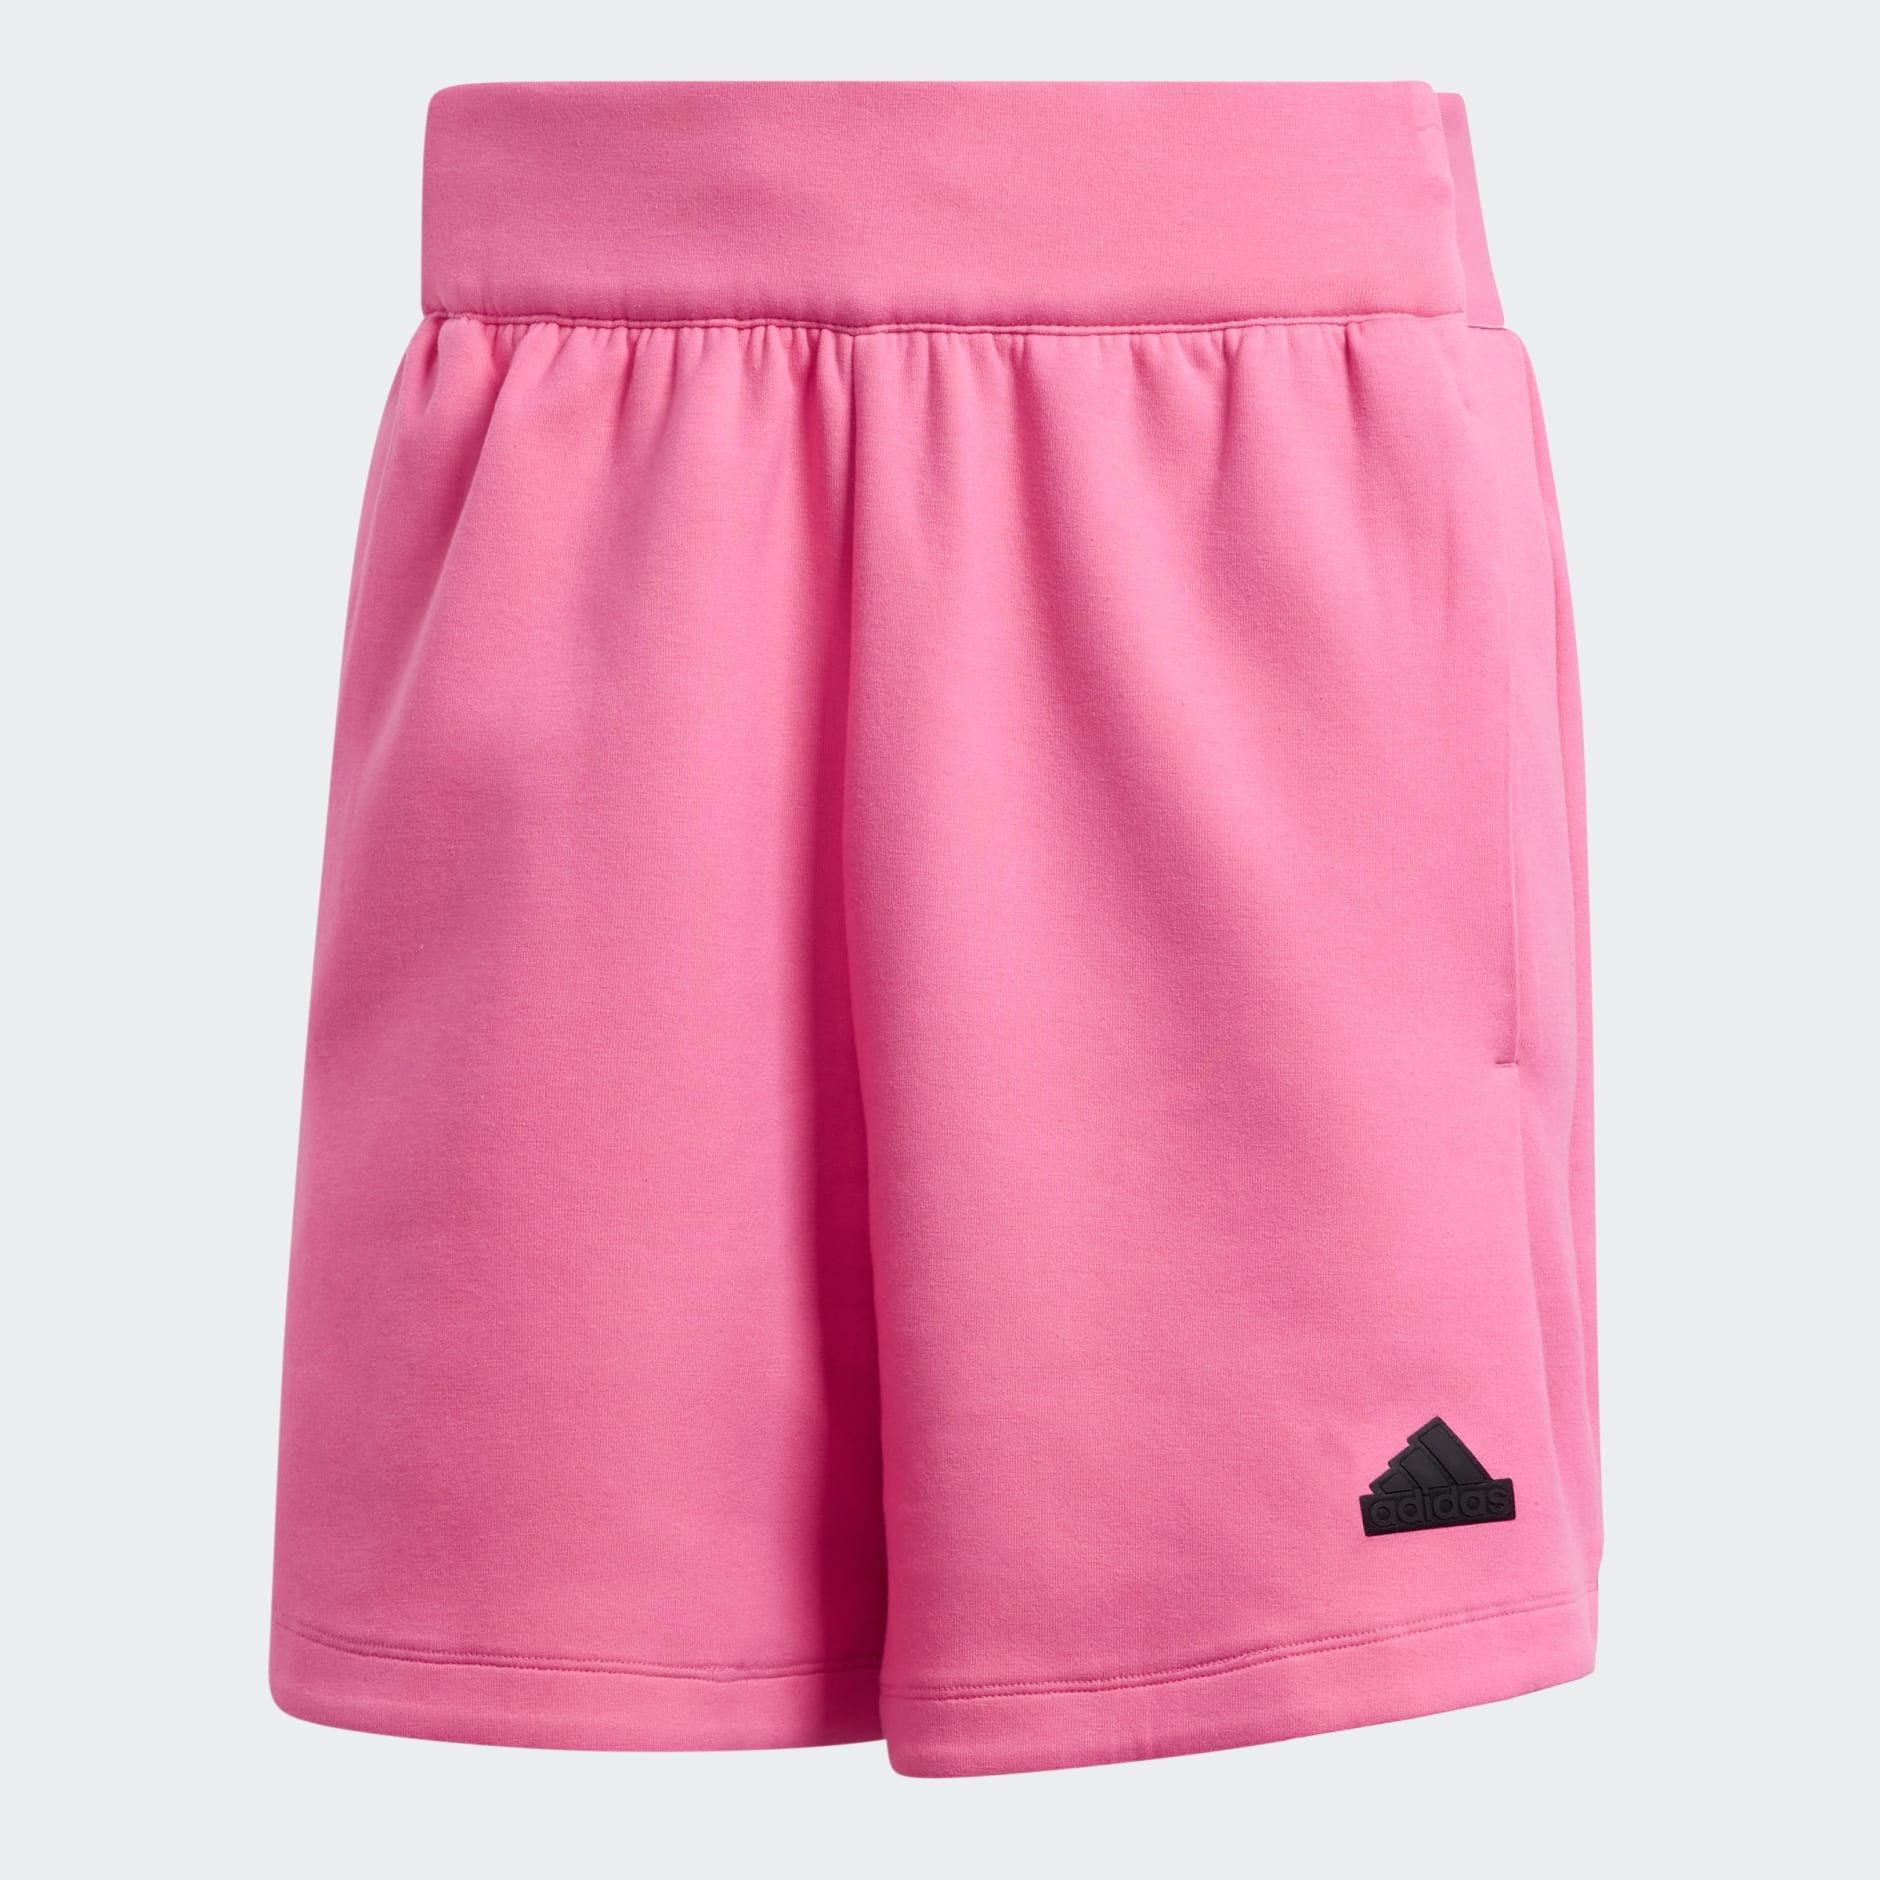 Clothing - Z.N.E. Premium Shorts - Pink | adidas South Africa